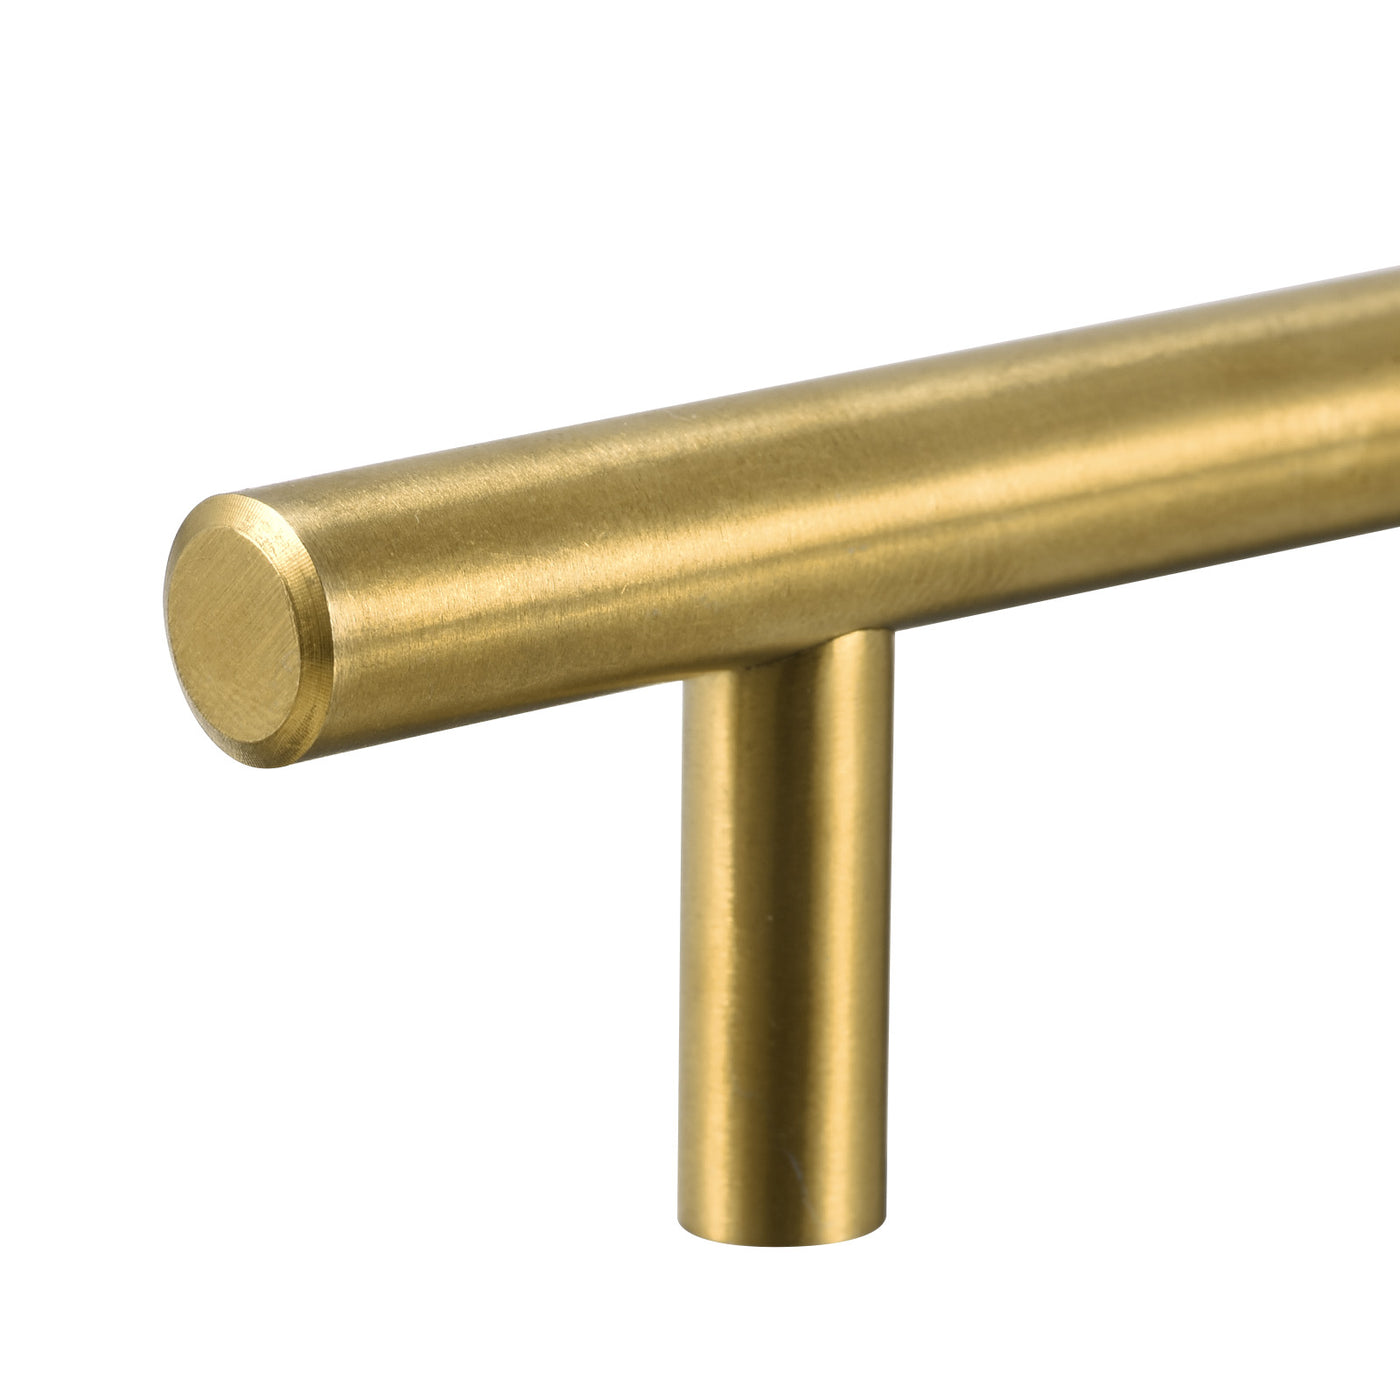 uxcell Uxcell T Bar Pull Handle, 6"(150mm) Length 12mm Dia Stainless Steel Cabinet Pulls 3.8"(96mm) Hole Center Distance Gold Tone 5pcs